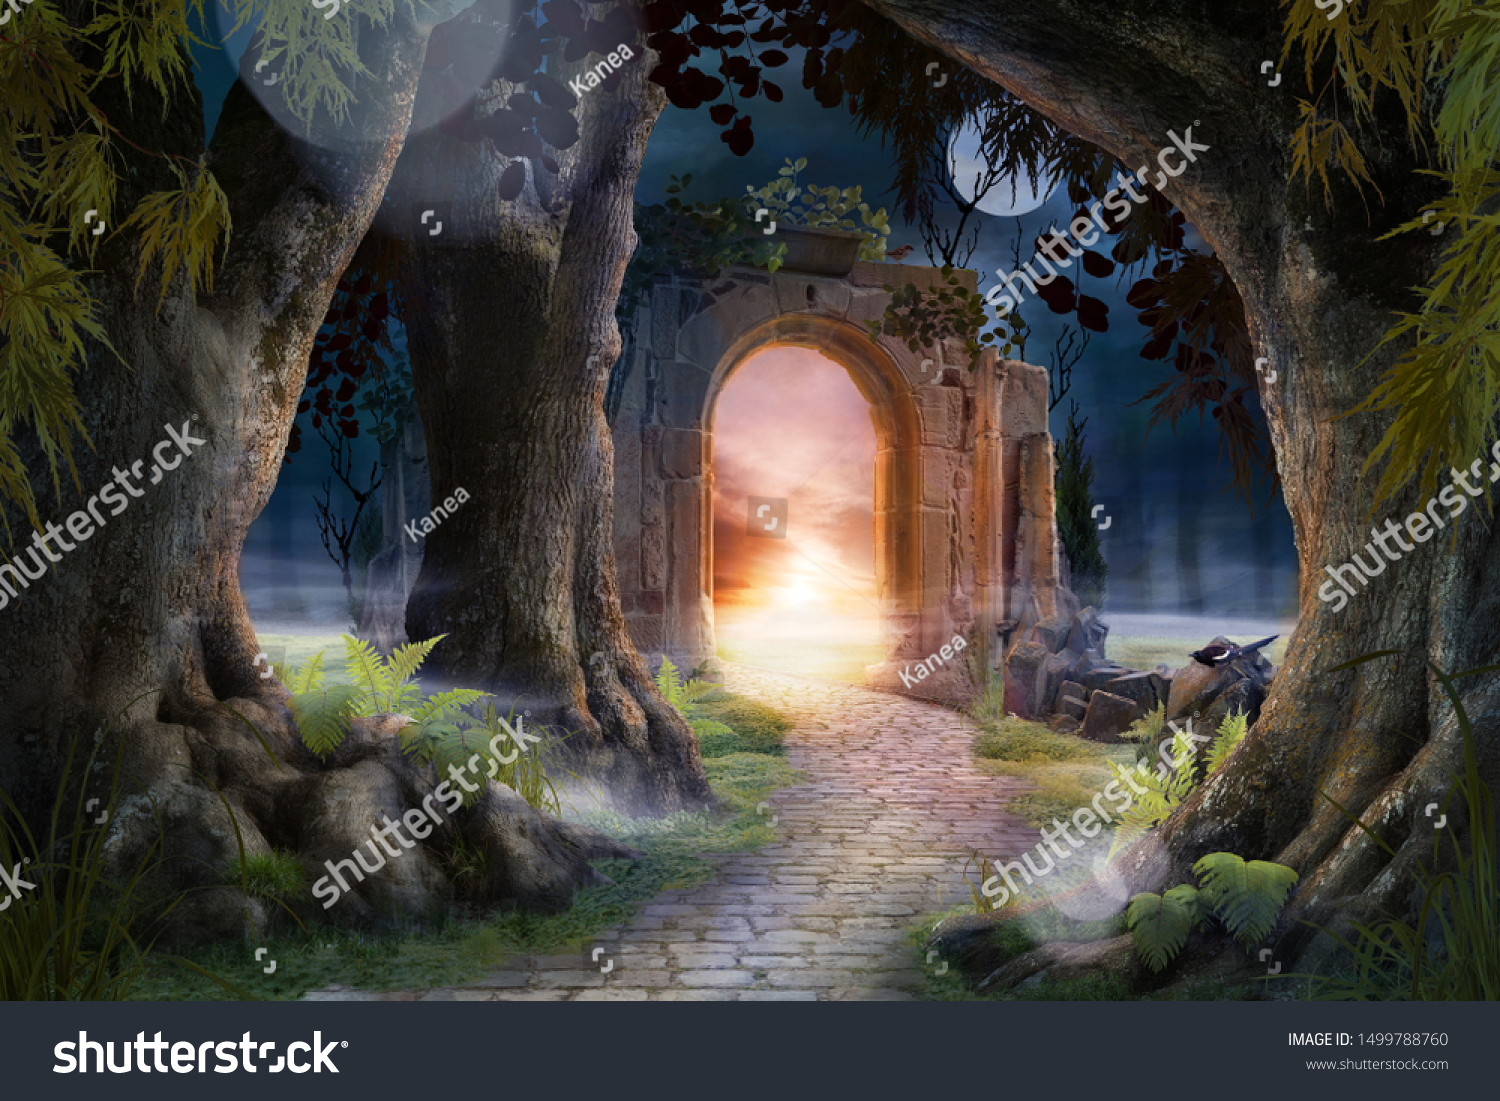 Archway in an enchanted fairy garden landscape, can be used as background #1499788760